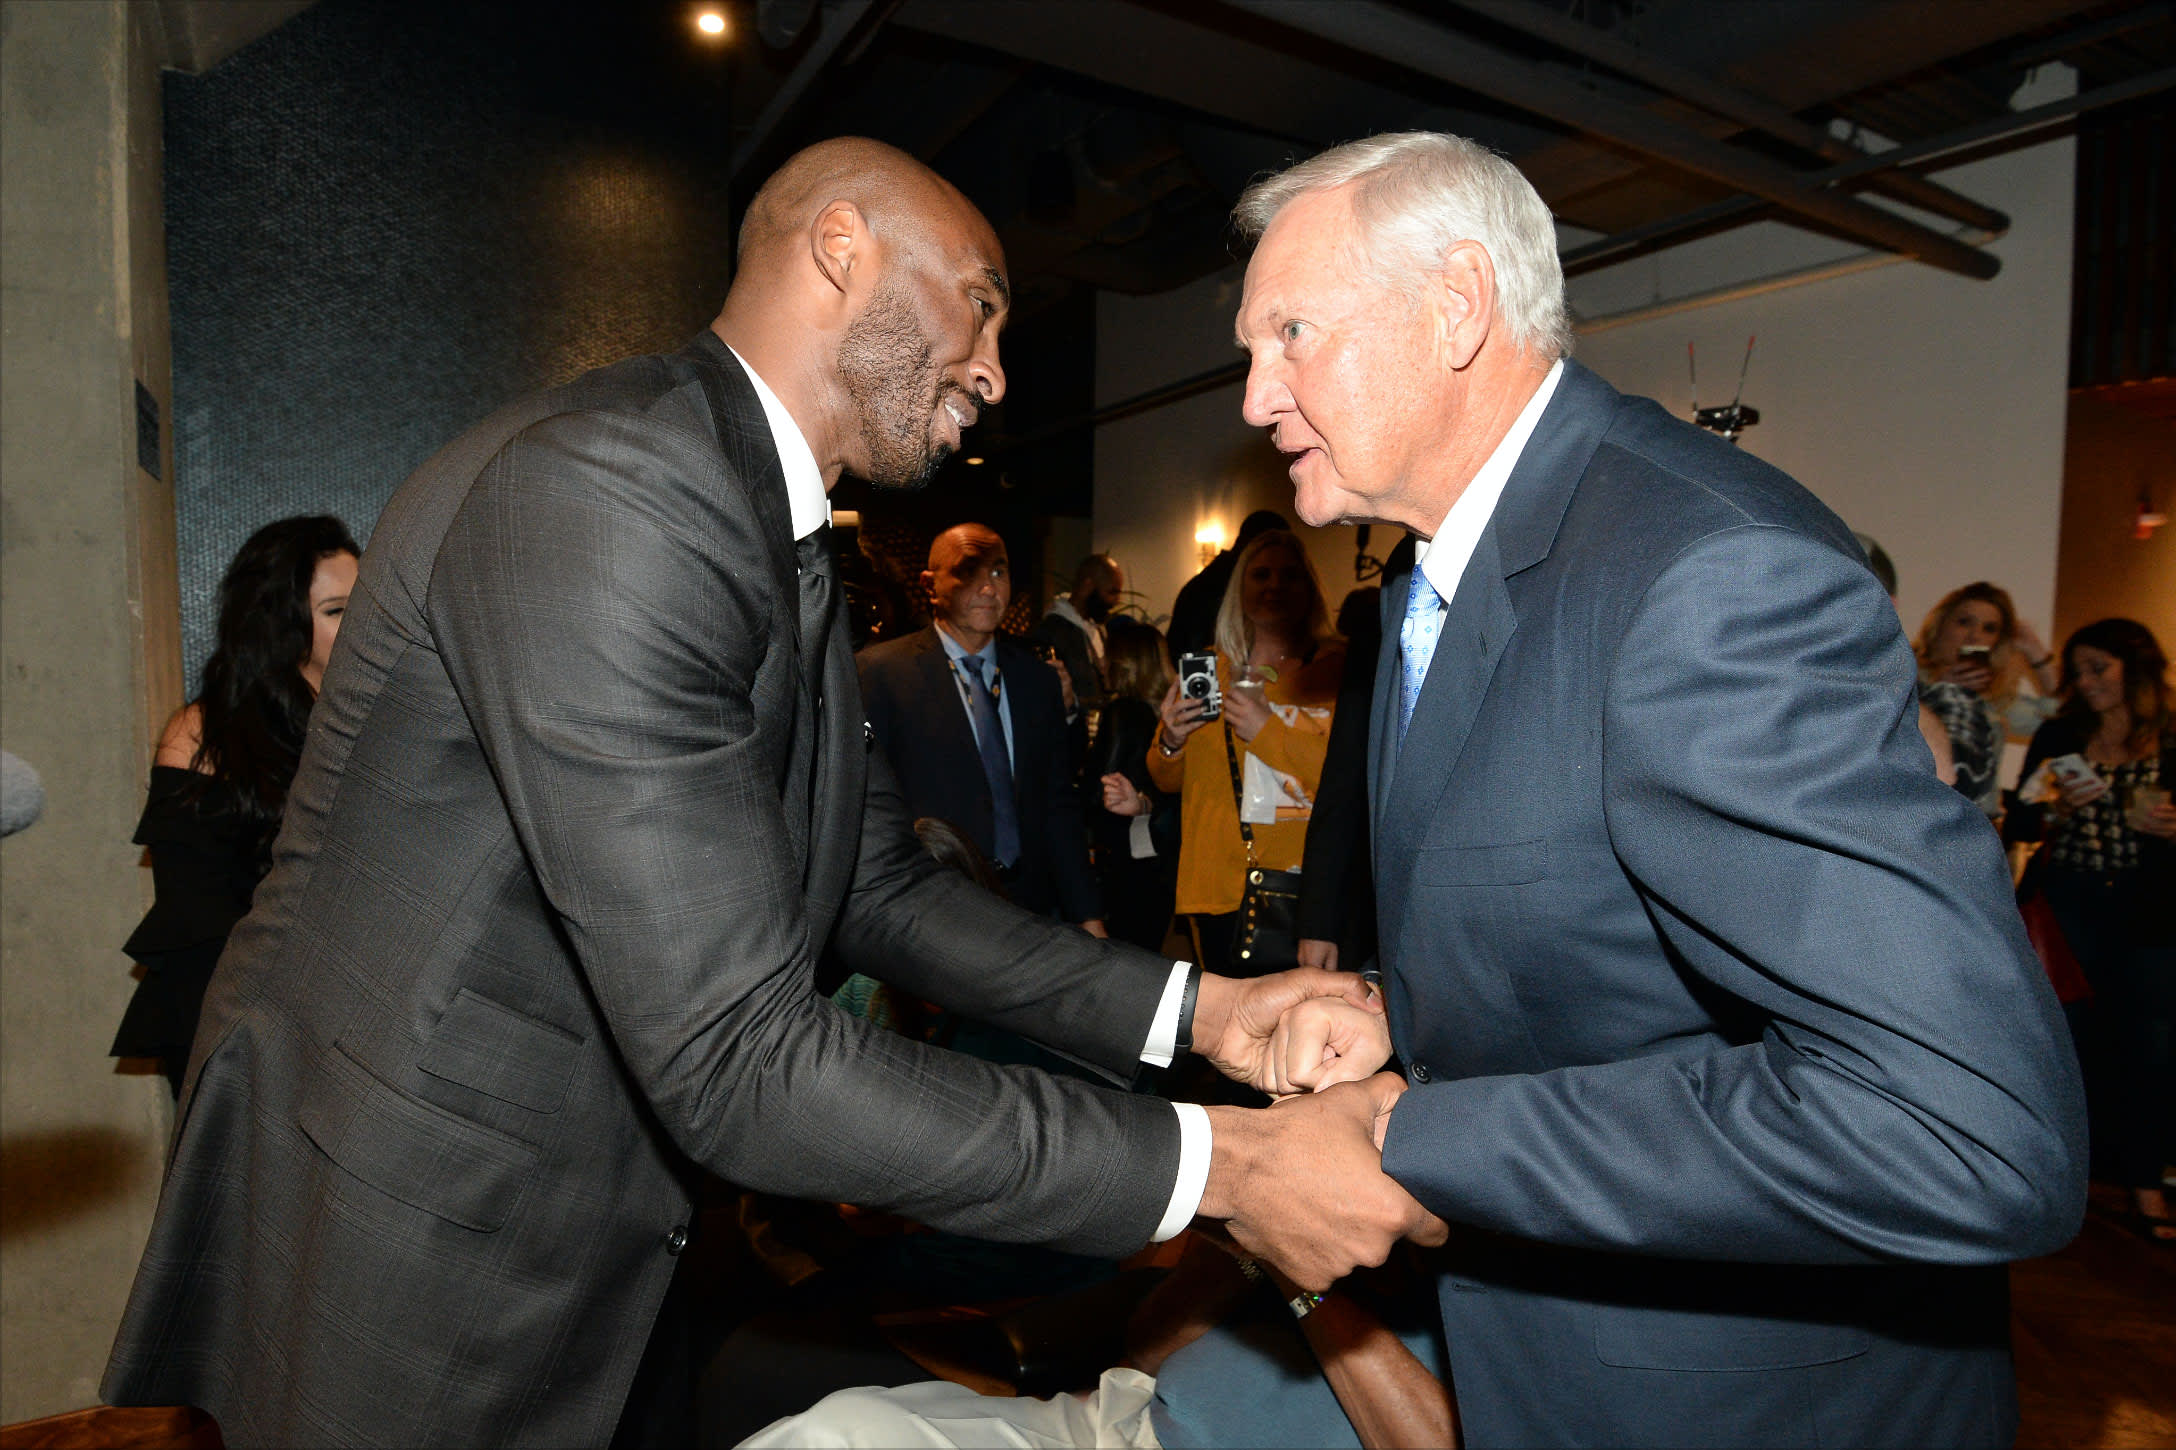 Jerry West reflects on the life and legacy of Kobe Bryant